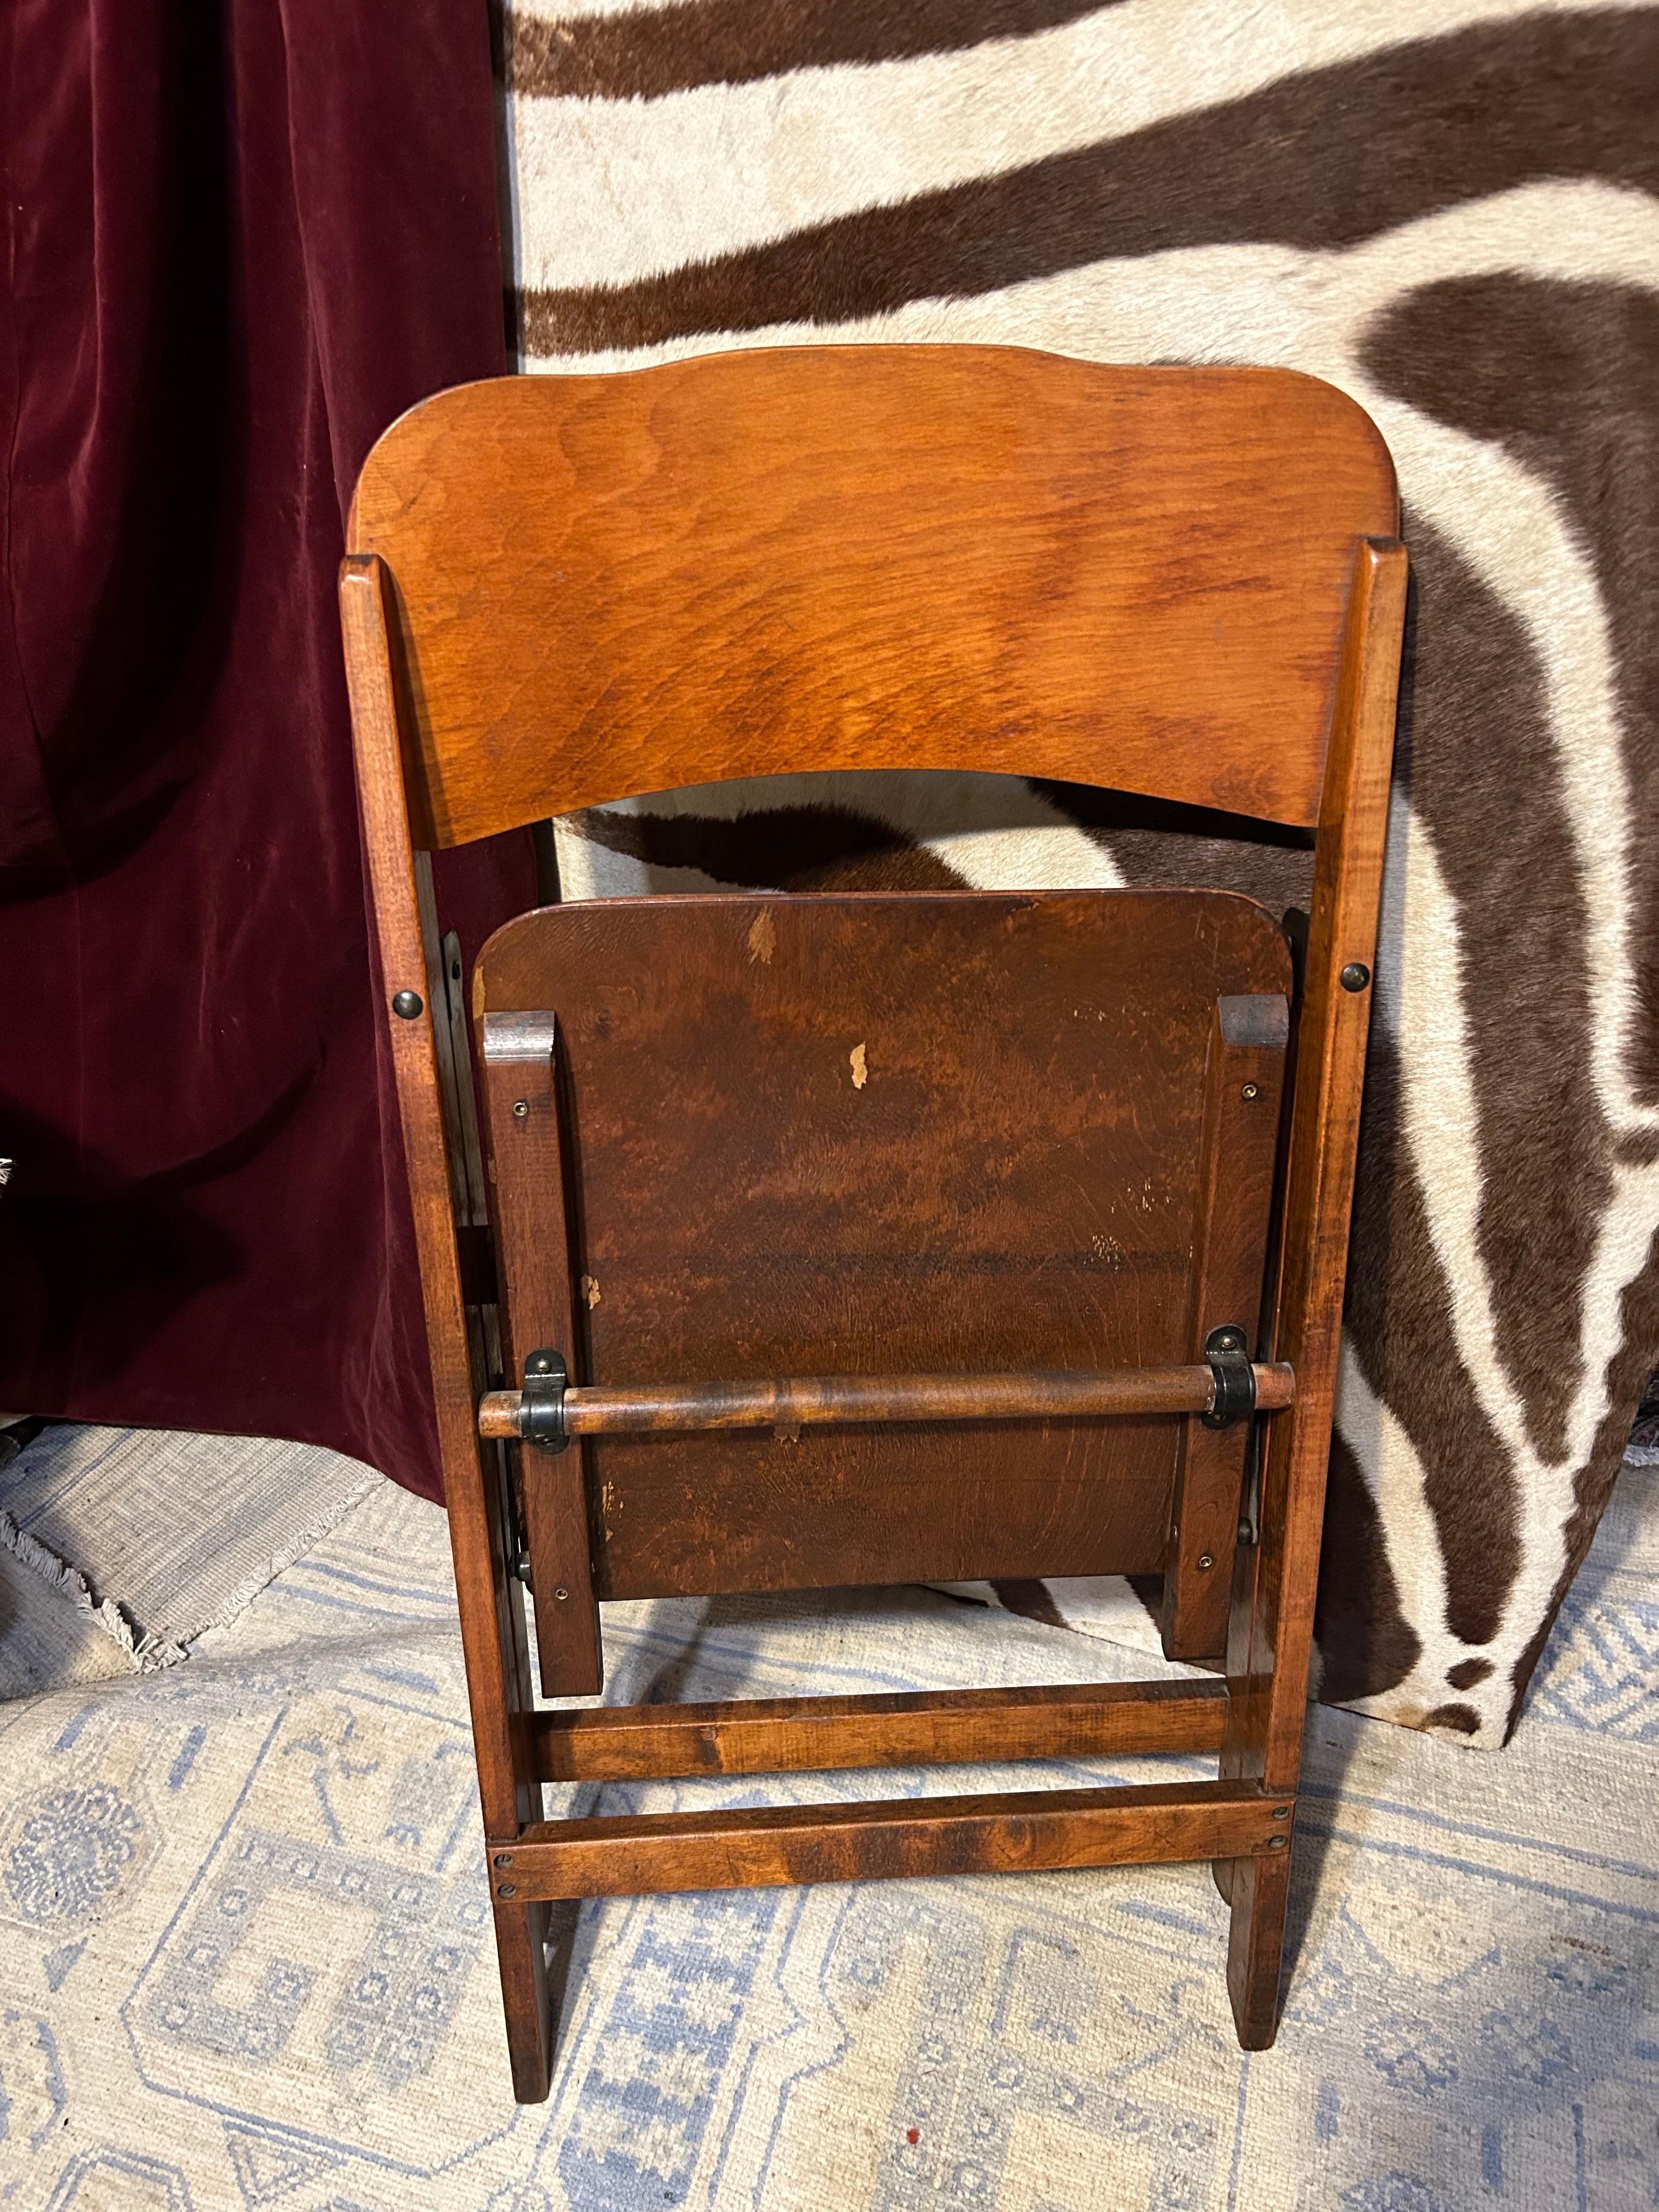 19th Century Steamed Wood Folding Campaign Chair With Metal Hardware In Good Condition For Sale In Vancouver, British Columbia